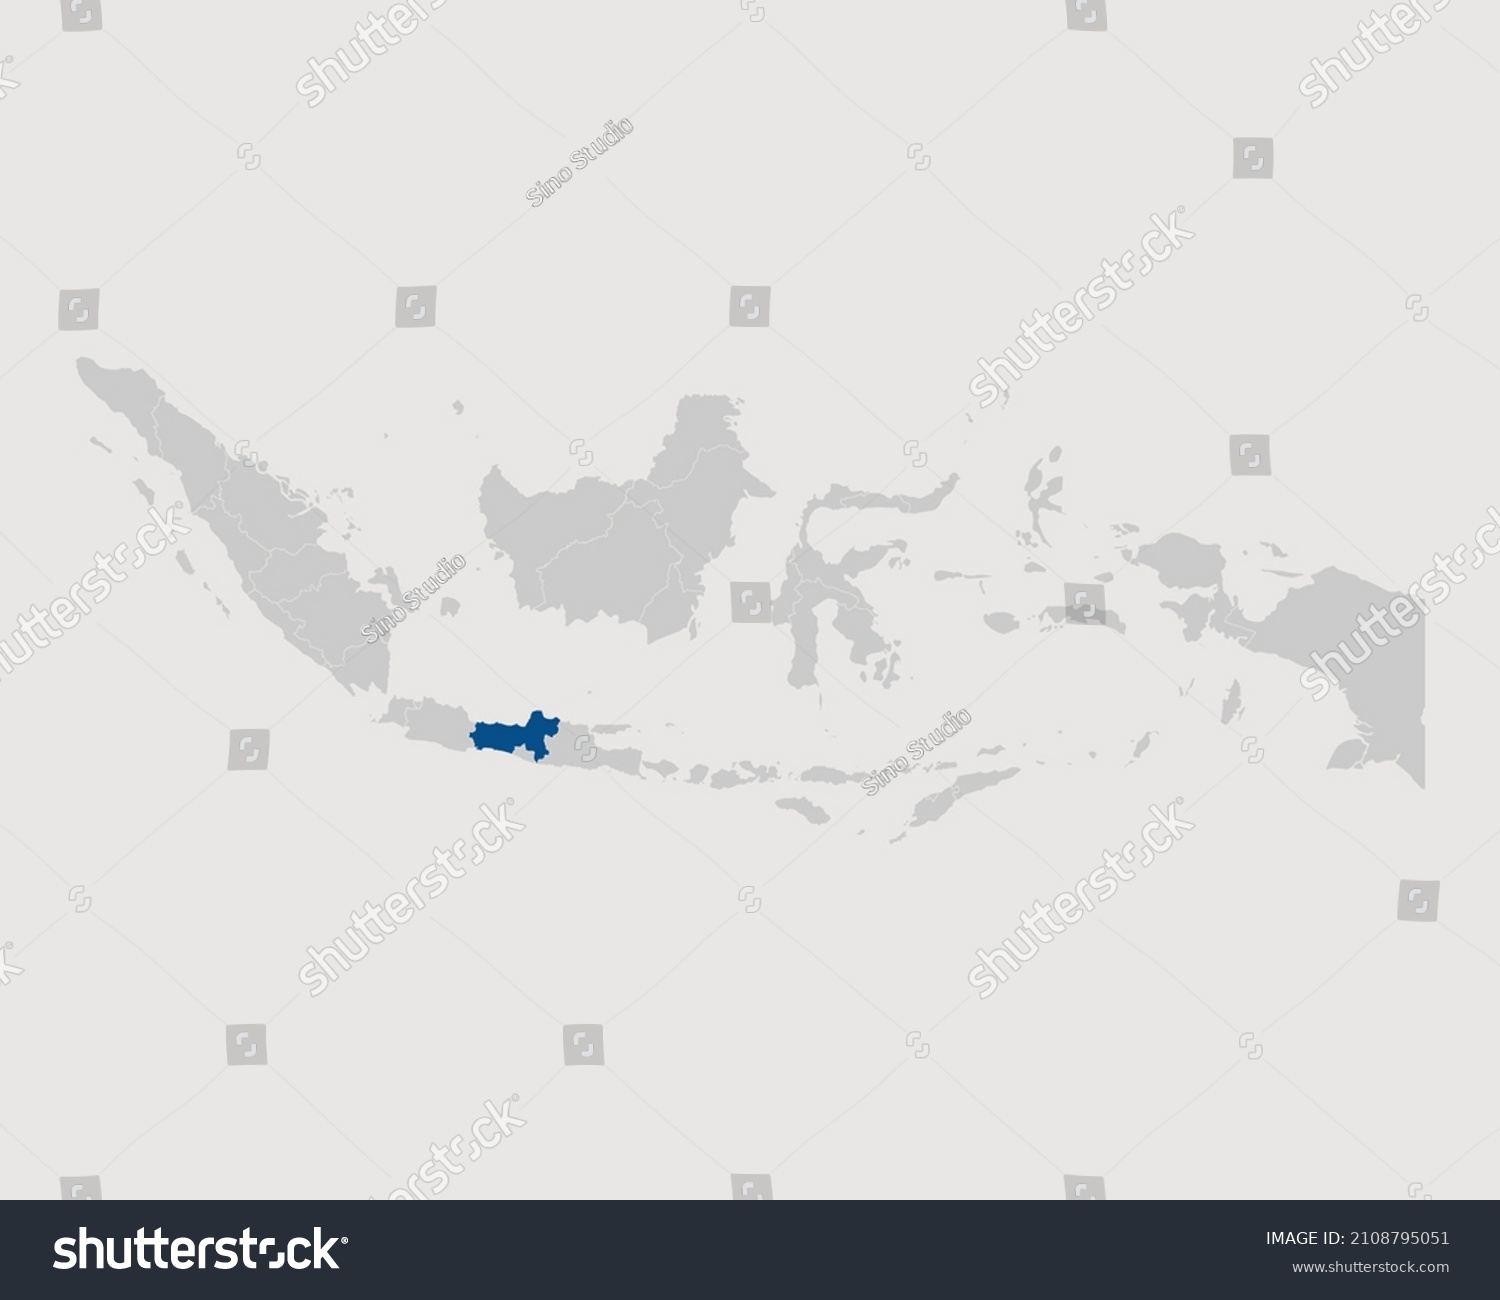 Jawa Tengah Highlighted On Indonesia Map Stock Vector Royalty Free